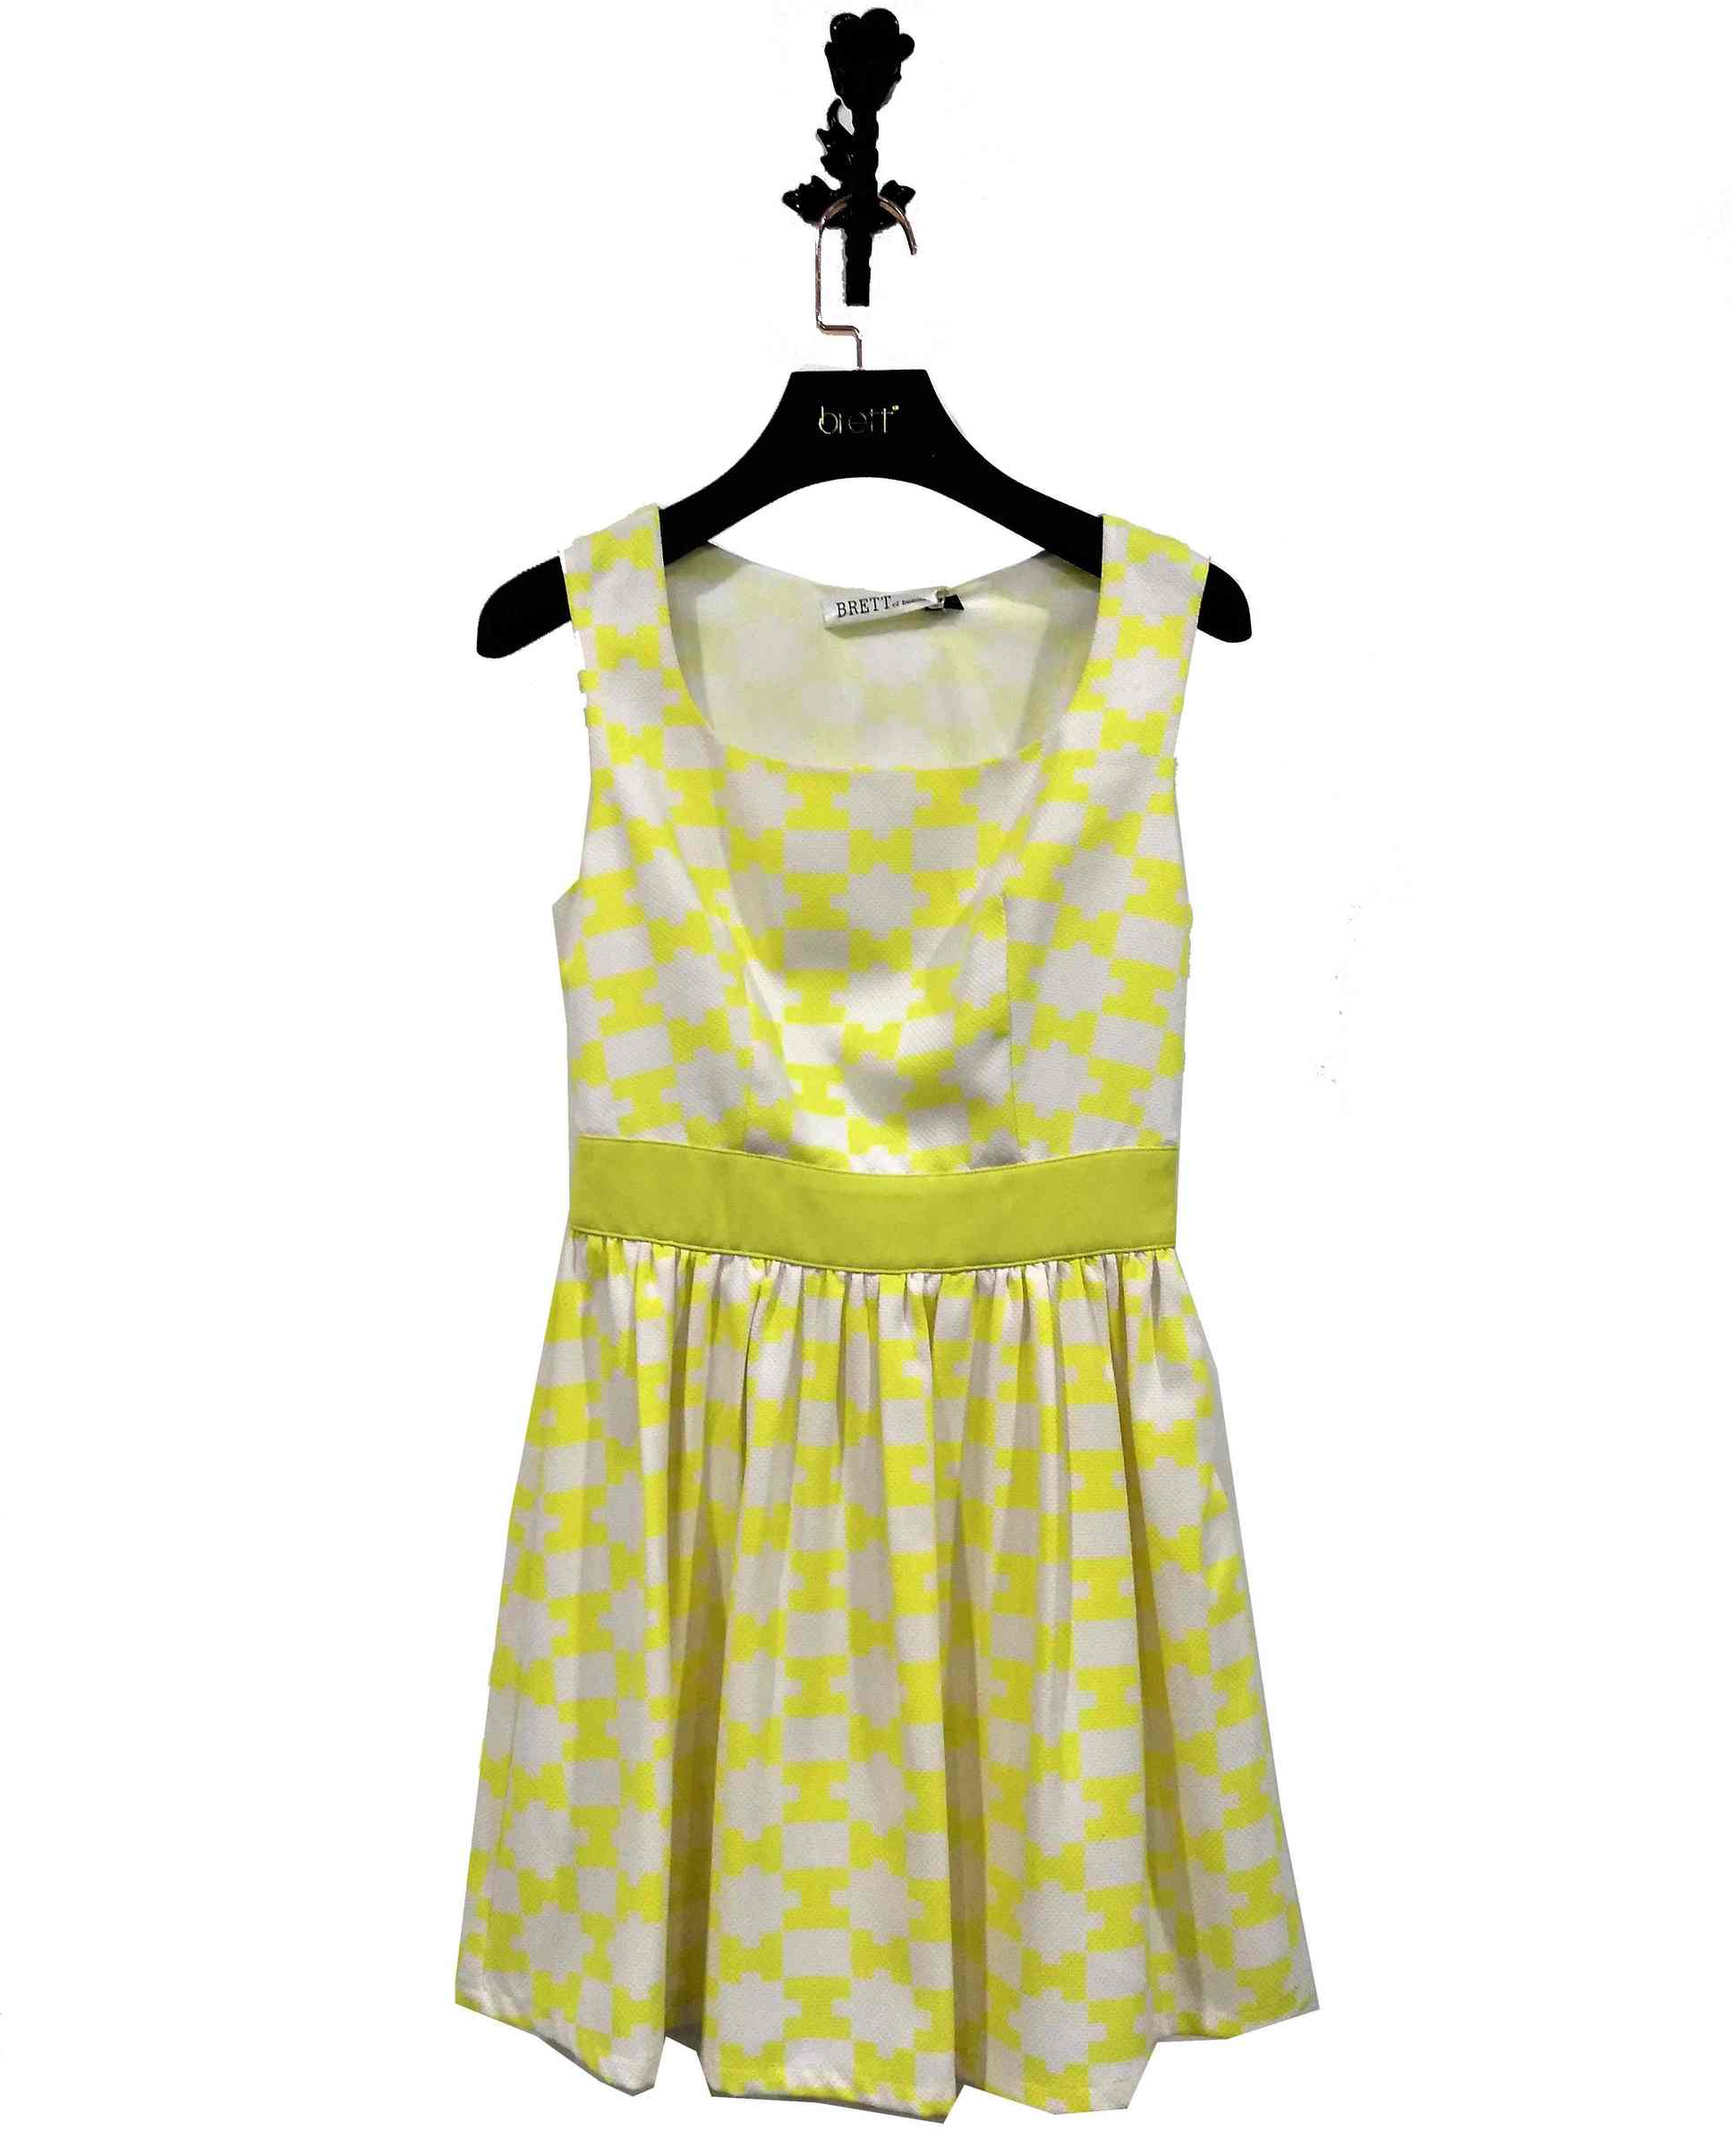 Yellow Jacquard dress design summer spring woman with Ruffle dress ladies for Yellow pleat dress mature clothing (8).jpg